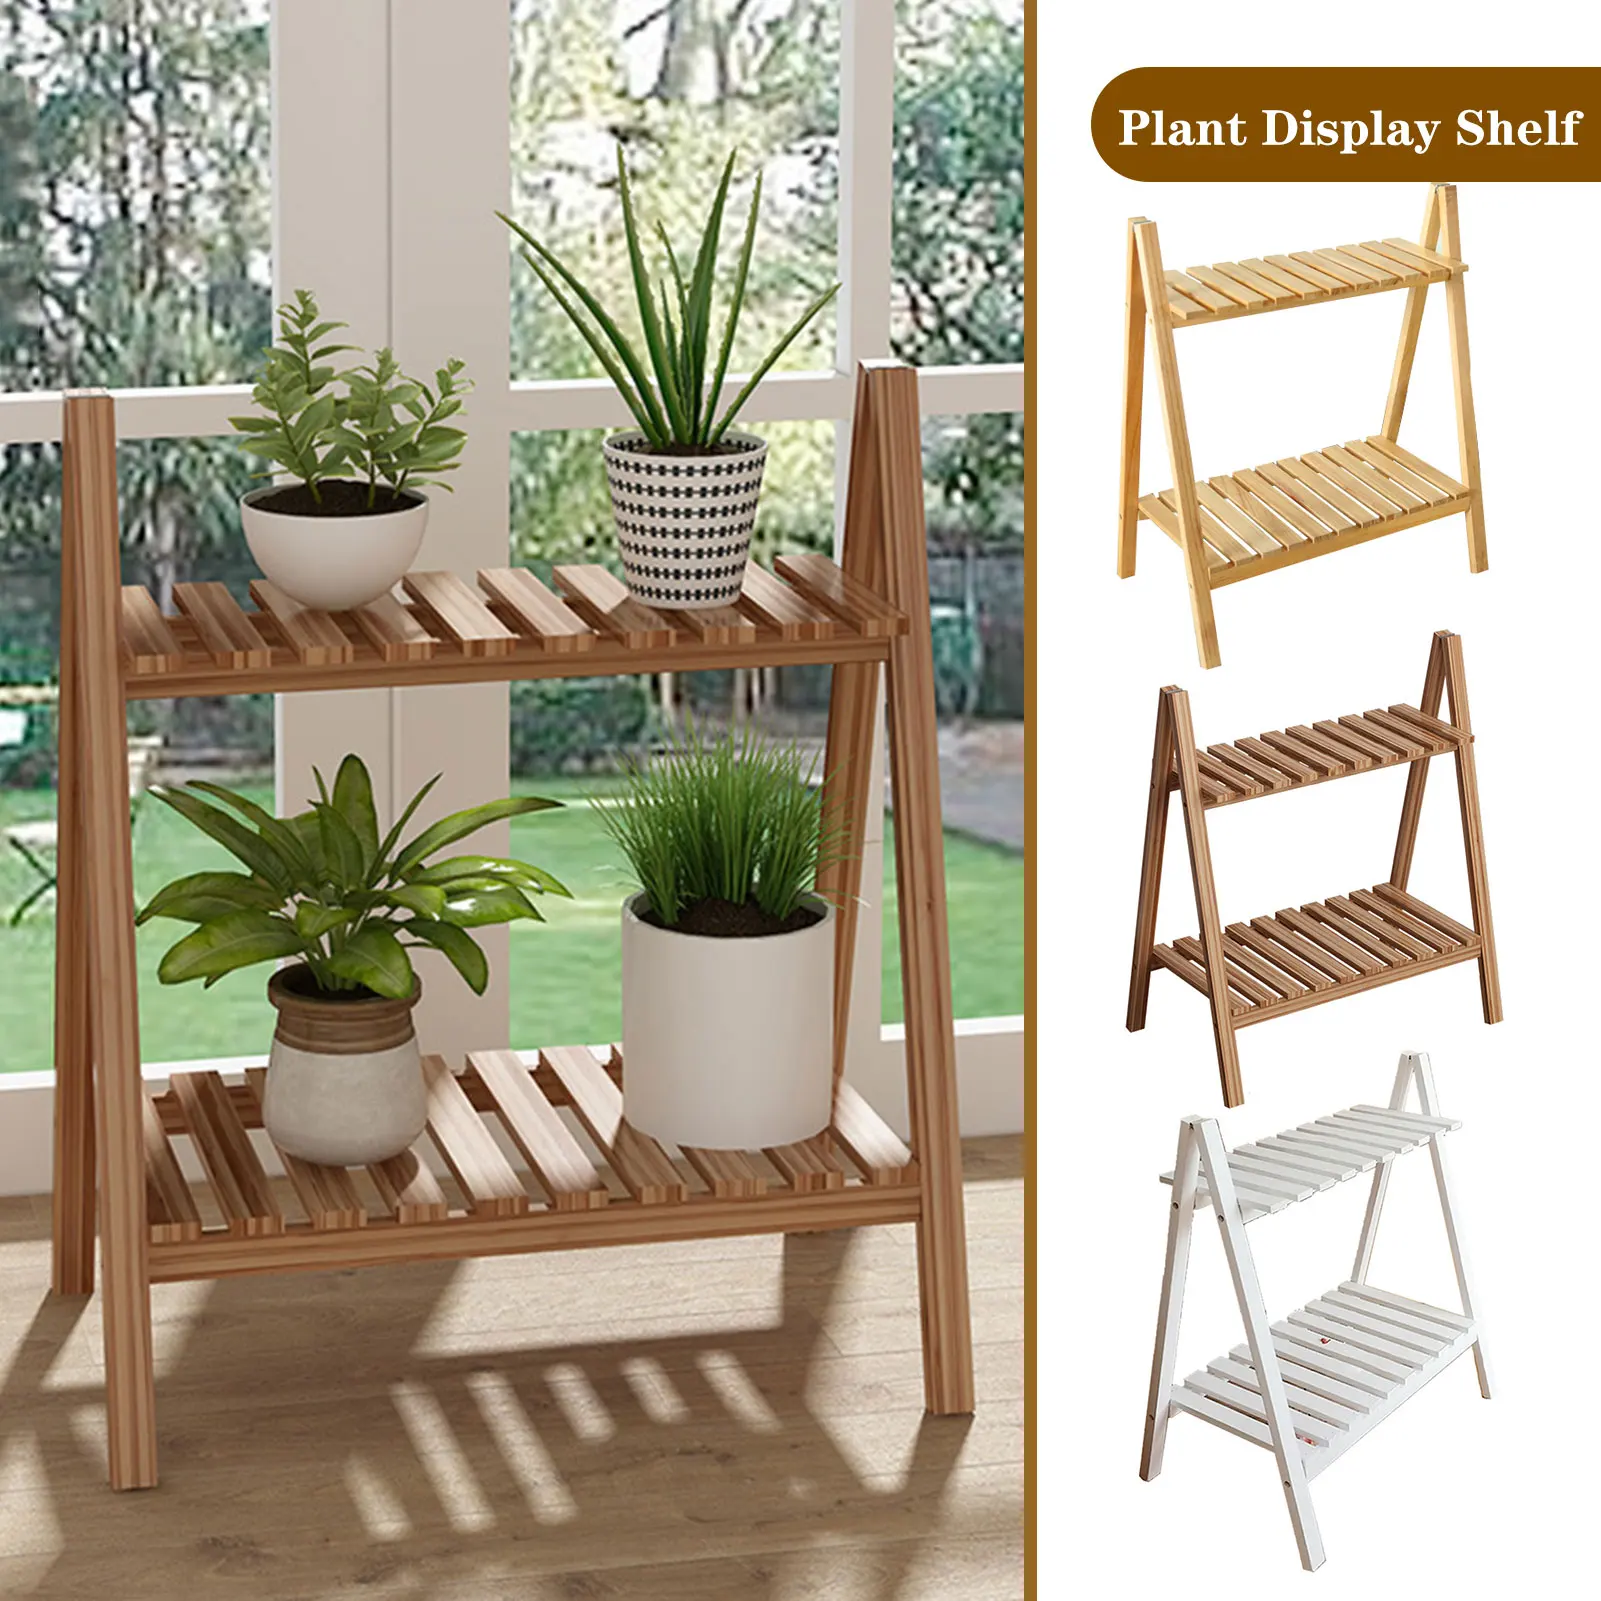 https://ae01.alicdn.com/kf/Hc58908d84703436983b54da2b9f223c0i/Wooden-Plant-Stand-Rugged-And-Durable-Double-layer-Trapezoidal-Design-Household-2-Tier-Foldable-Flower-Pot.jpg